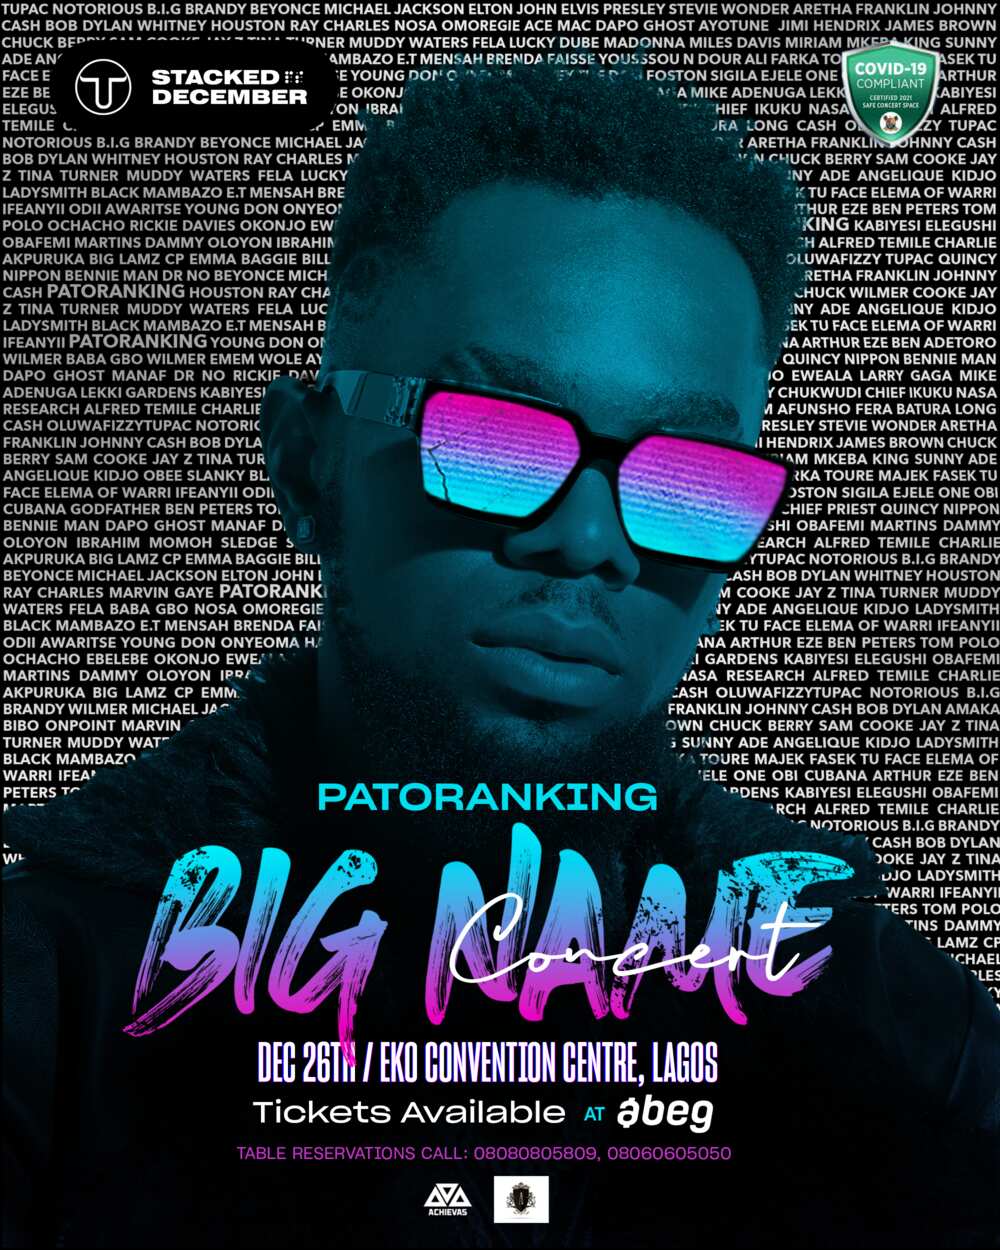 Patoranking to Perform Live on Boxing Day in ‘Big Name’ Concert